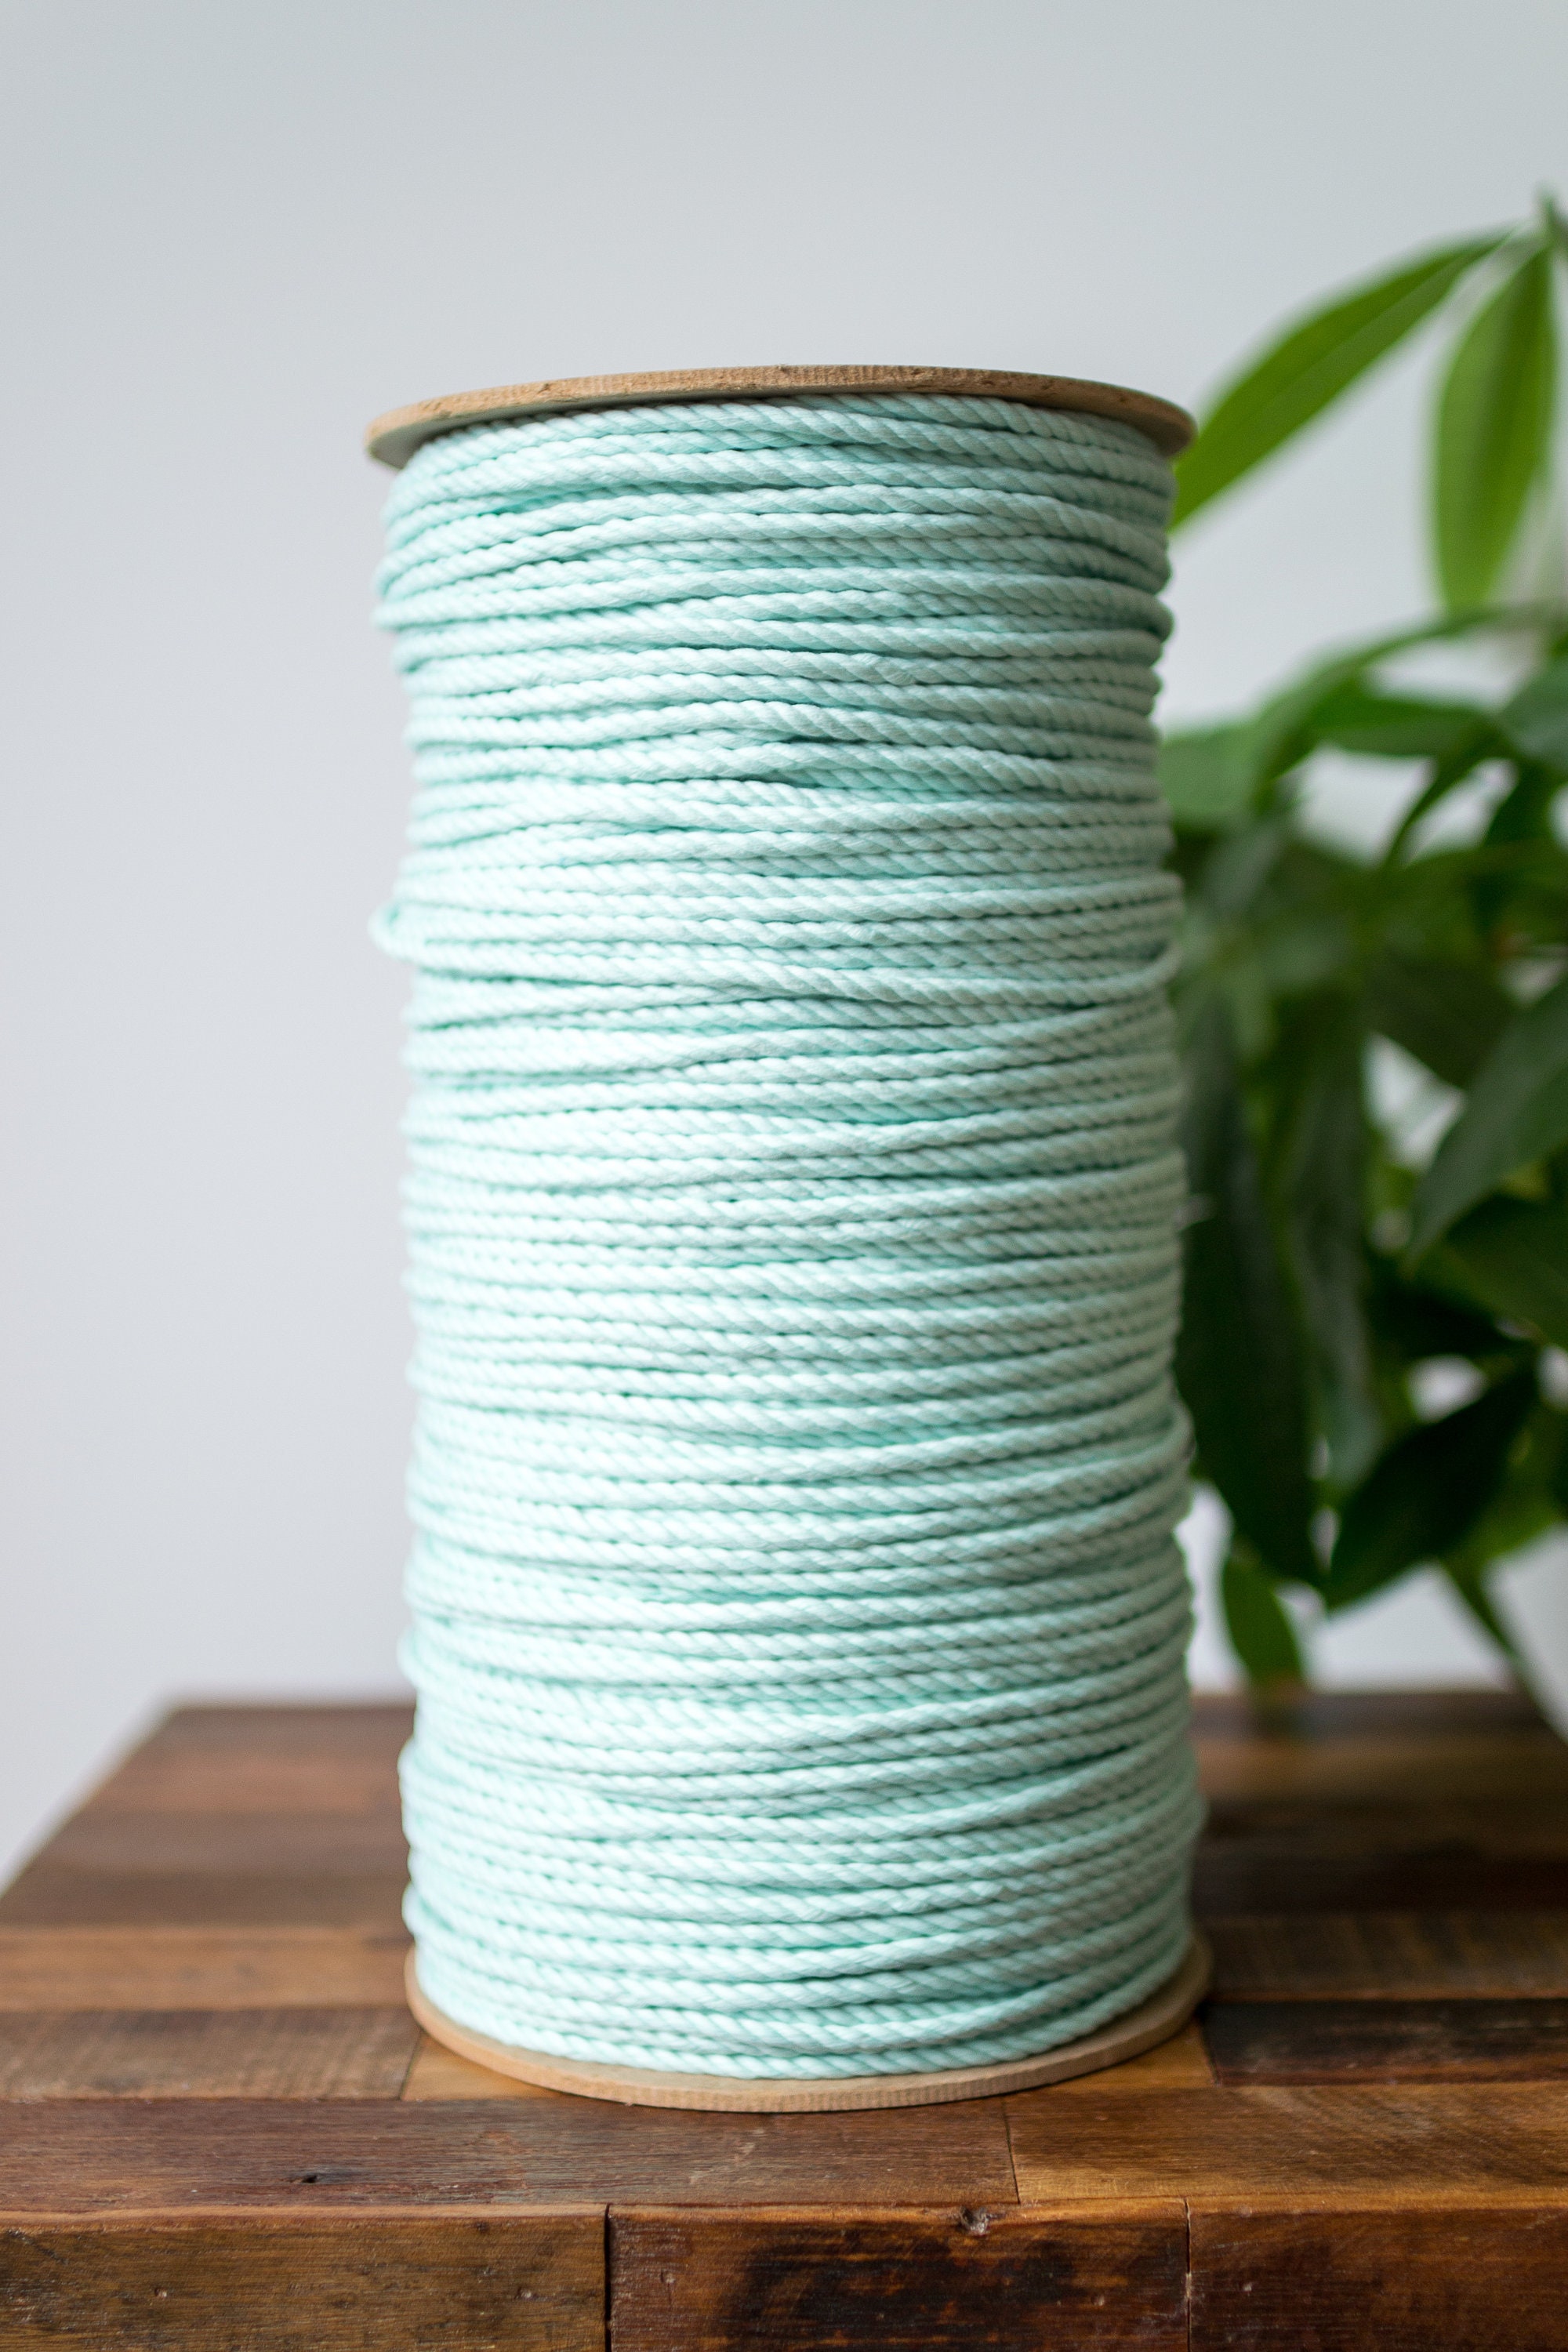 6MM Cotton Rope 1/4 Inch Macrame Cord Super Soft Weaving Cord Three Strand  Twisted Cotton Rope Blue Green Variety Macrame Rope 